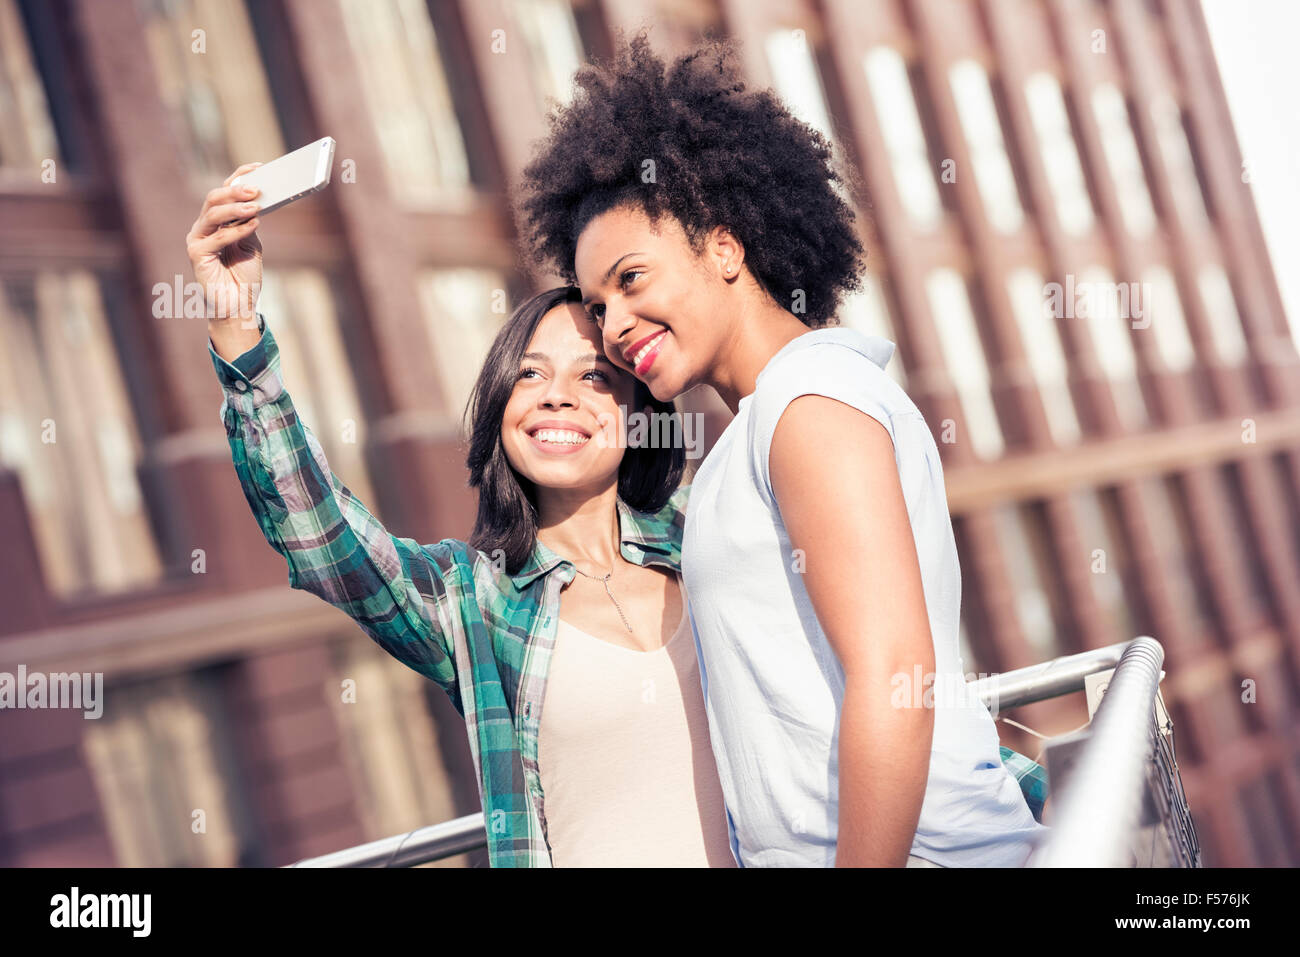 Two women posing and taking a selfie by a large building in the city Stock Photo